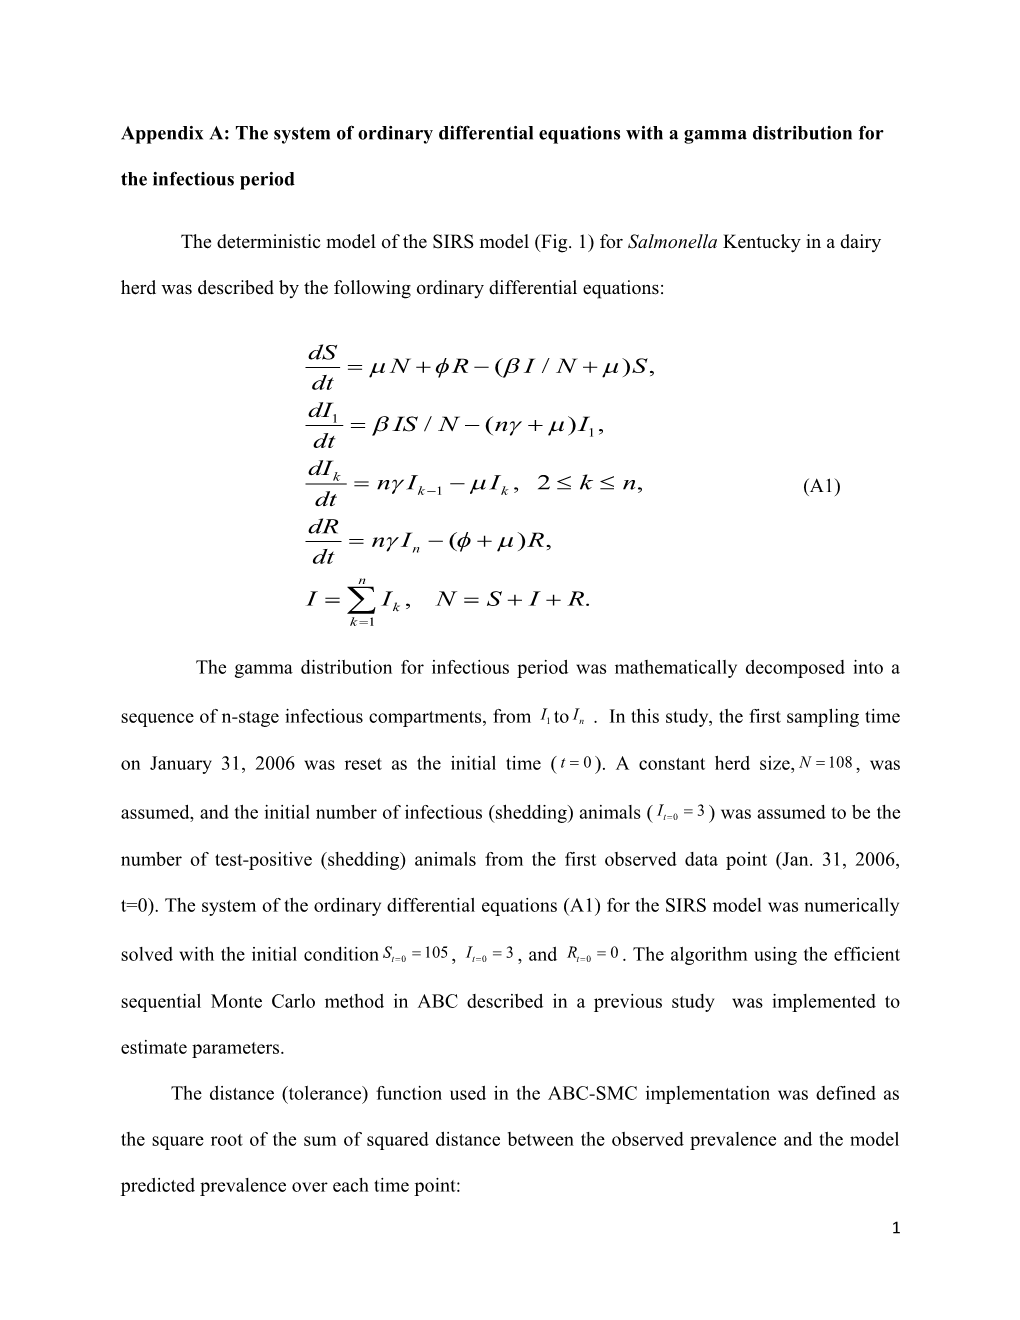 Appendix A: the System of Ordinary Differential Equations with a Gamma Distribution For